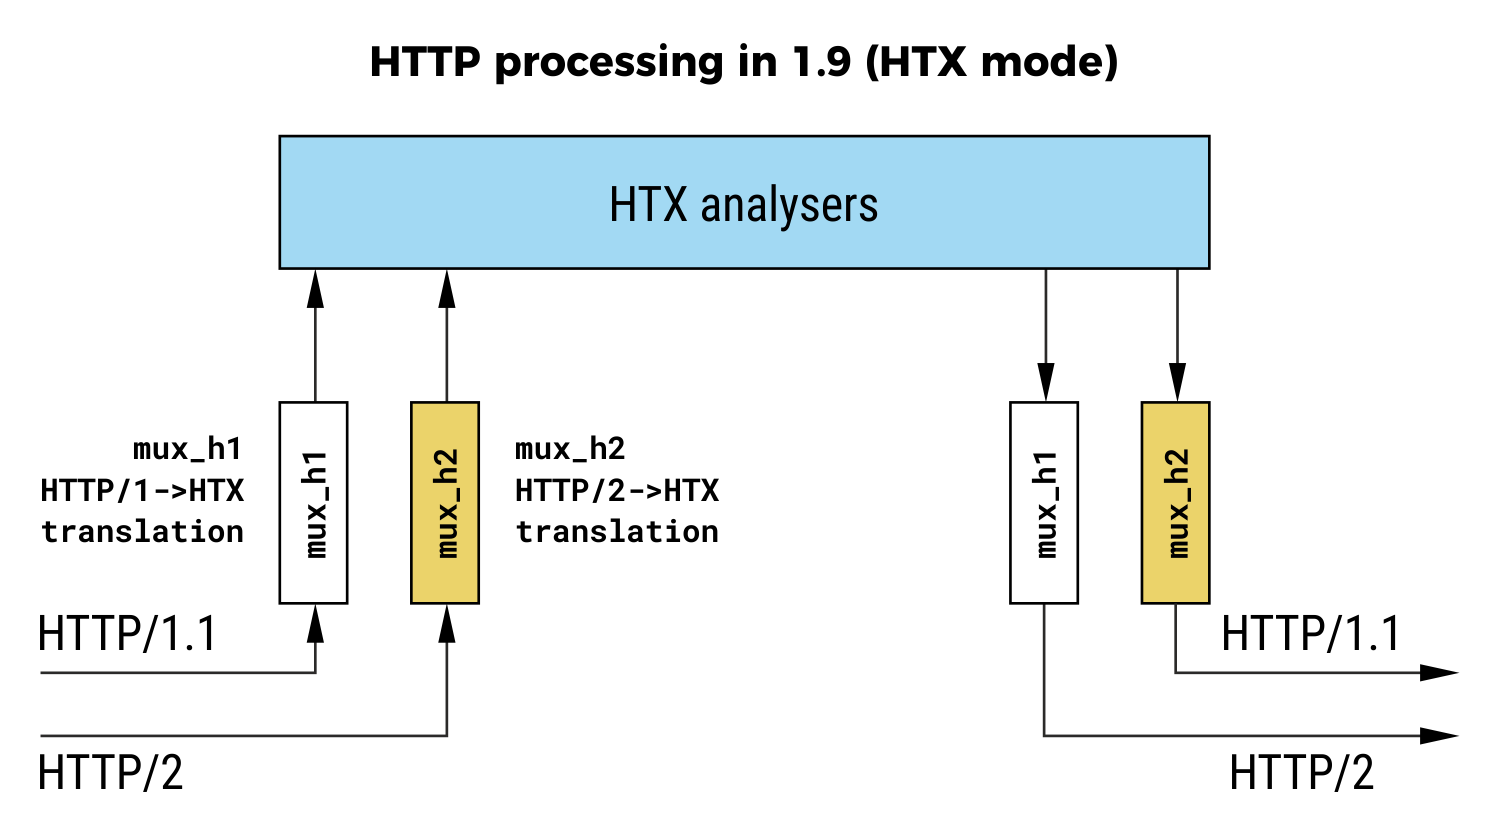  http processing in haproxy 1.9